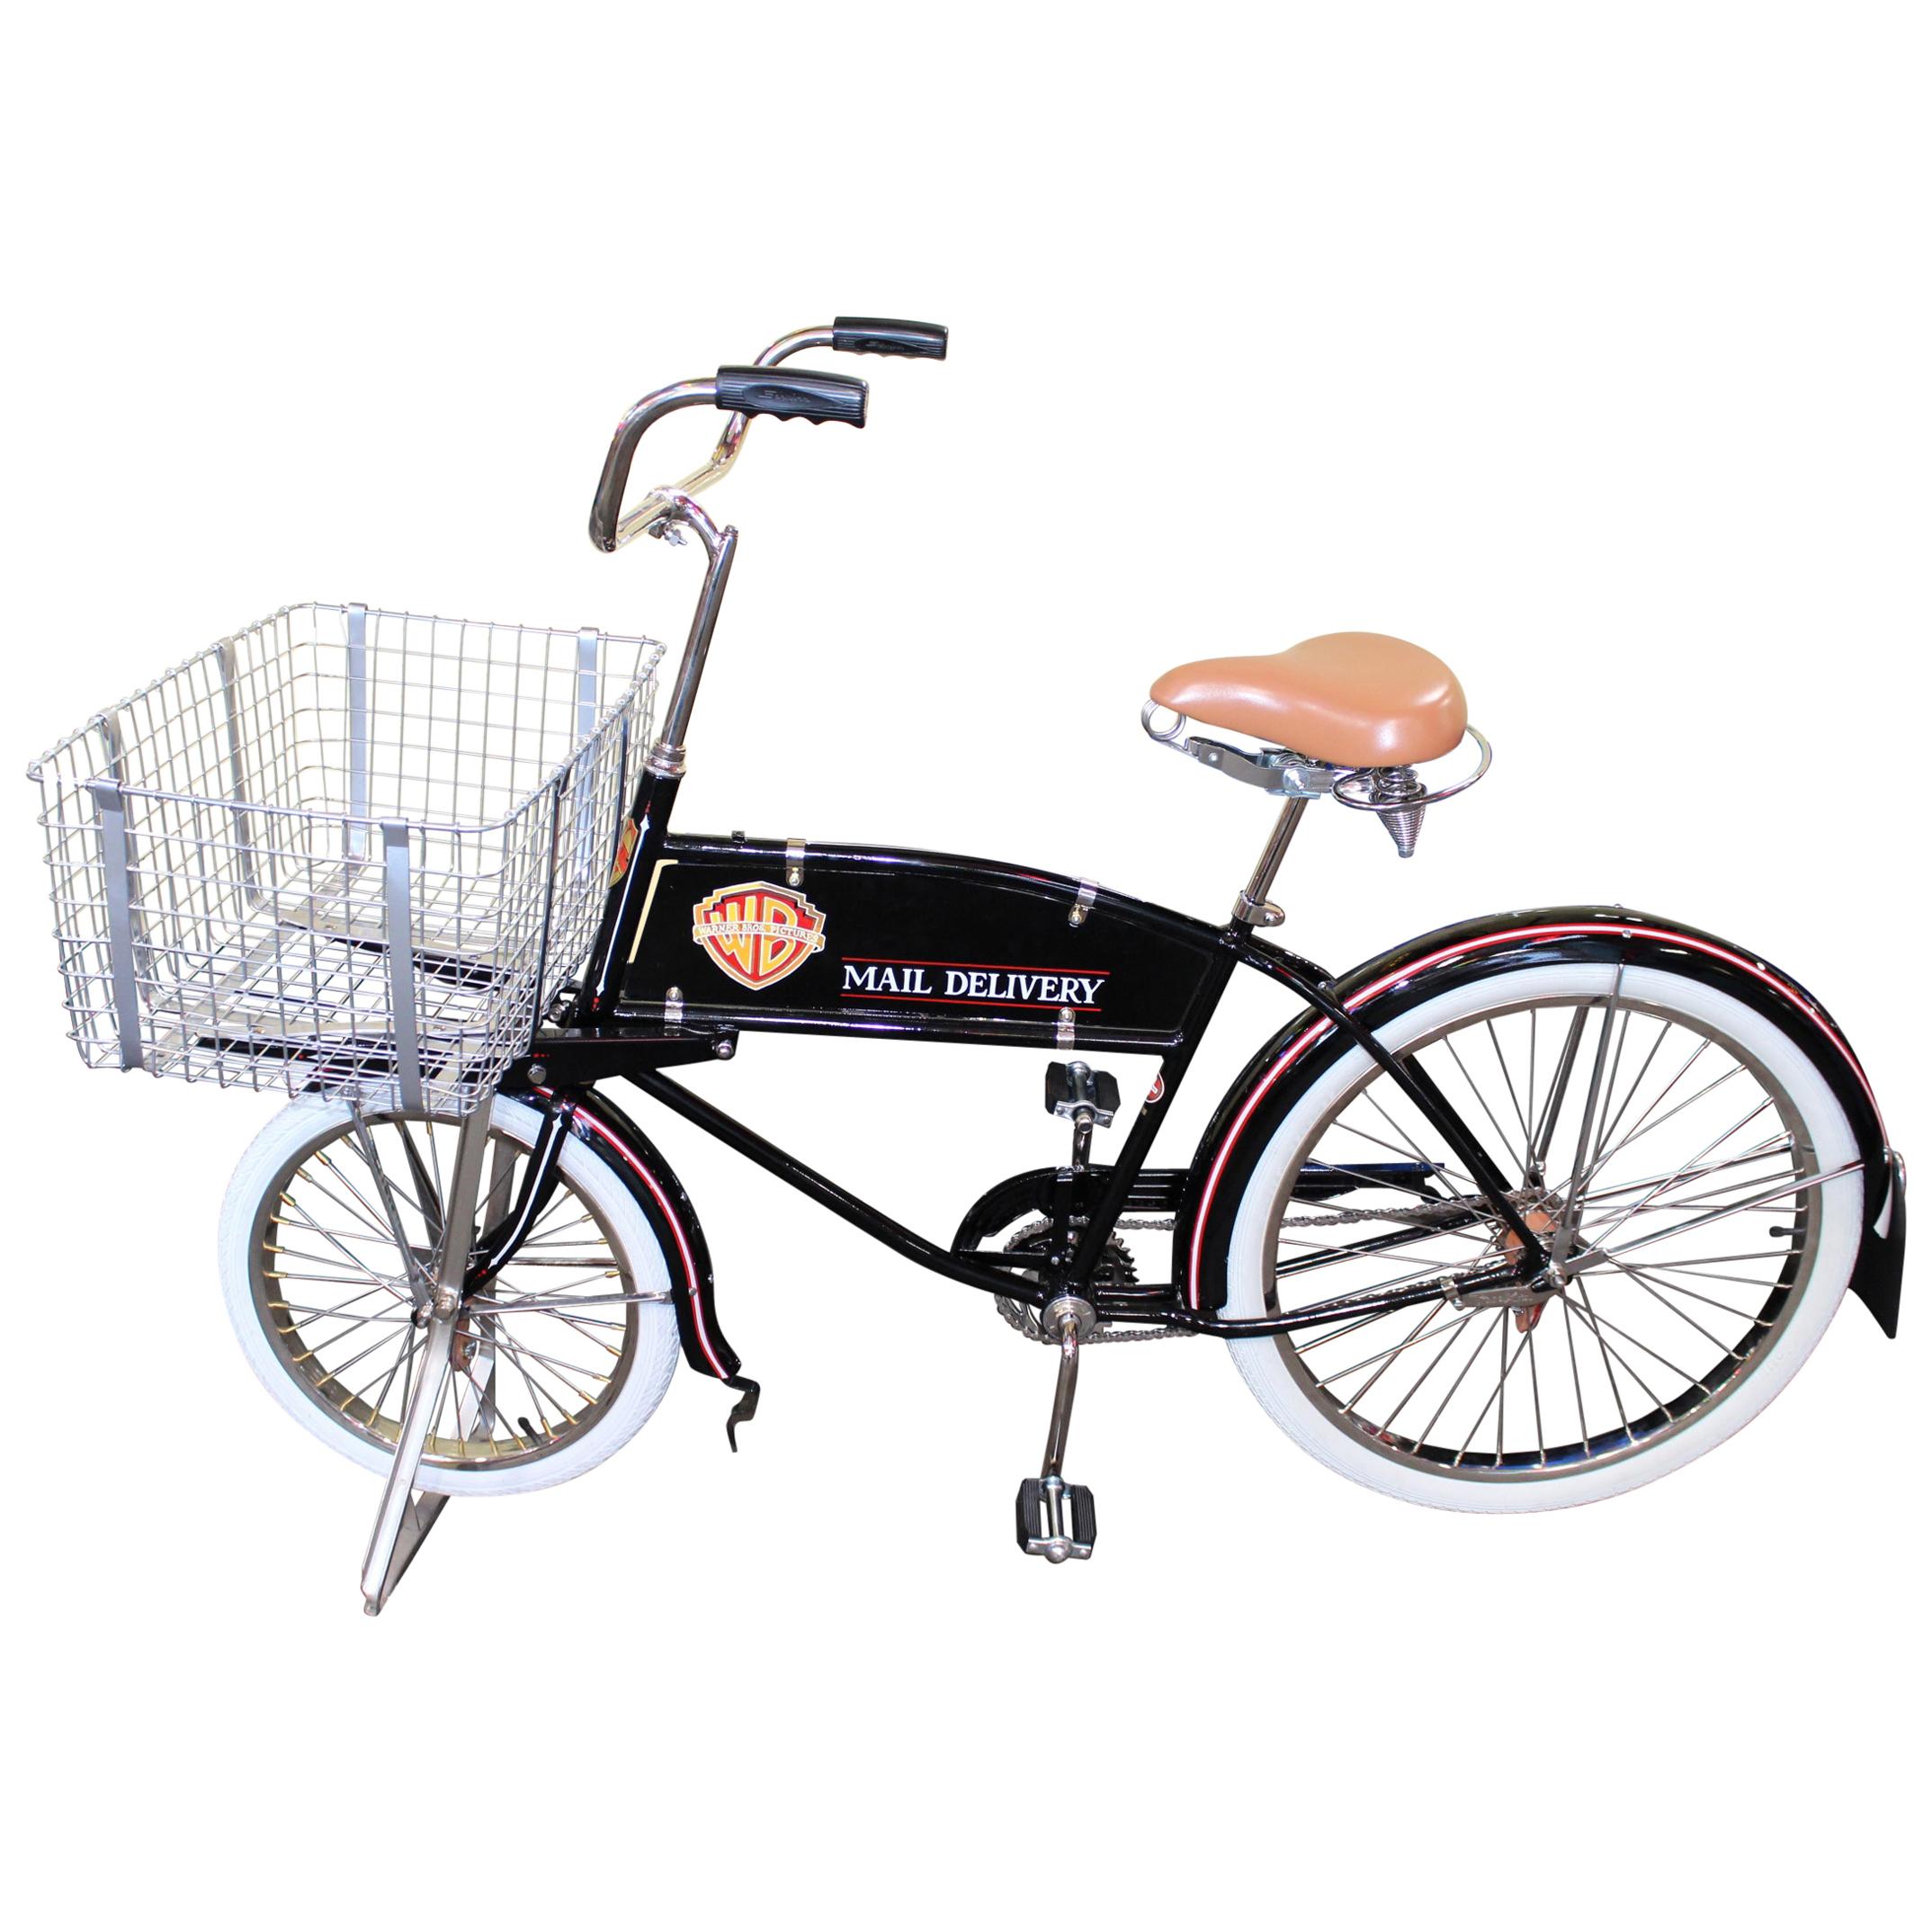 1939-1967 Schwinn Cycle Truck Bicycle For Sale